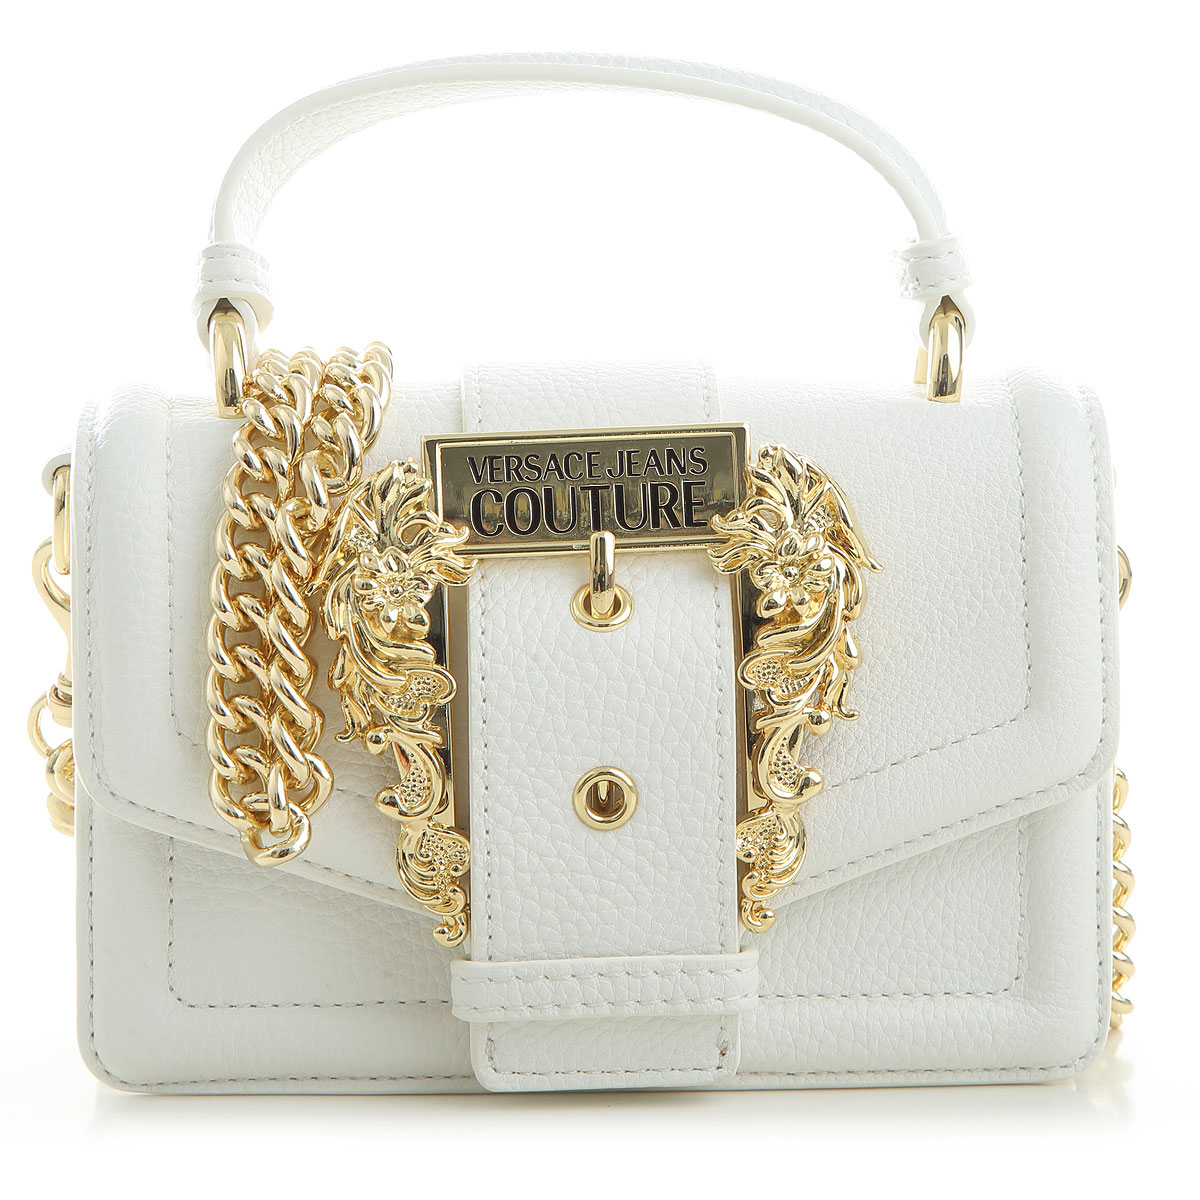 Handbags Versace Jeans Couture , Style code: 72va4bf6-71578-003